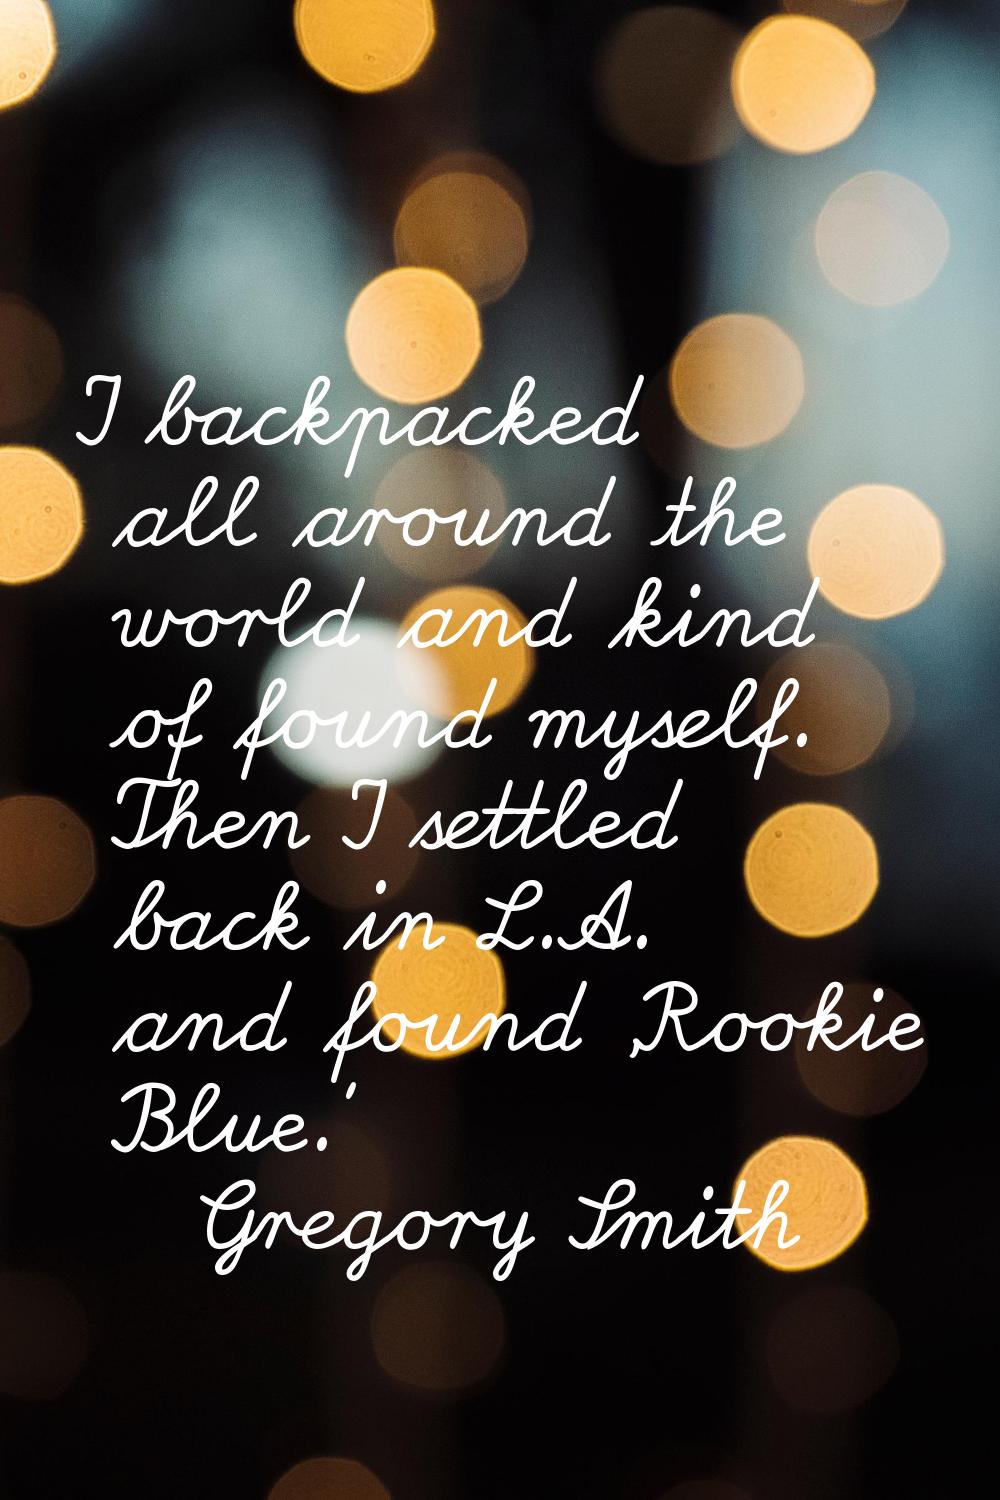 I backpacked all around the world and kind of found myself. Then I settled back in L.A. and found '